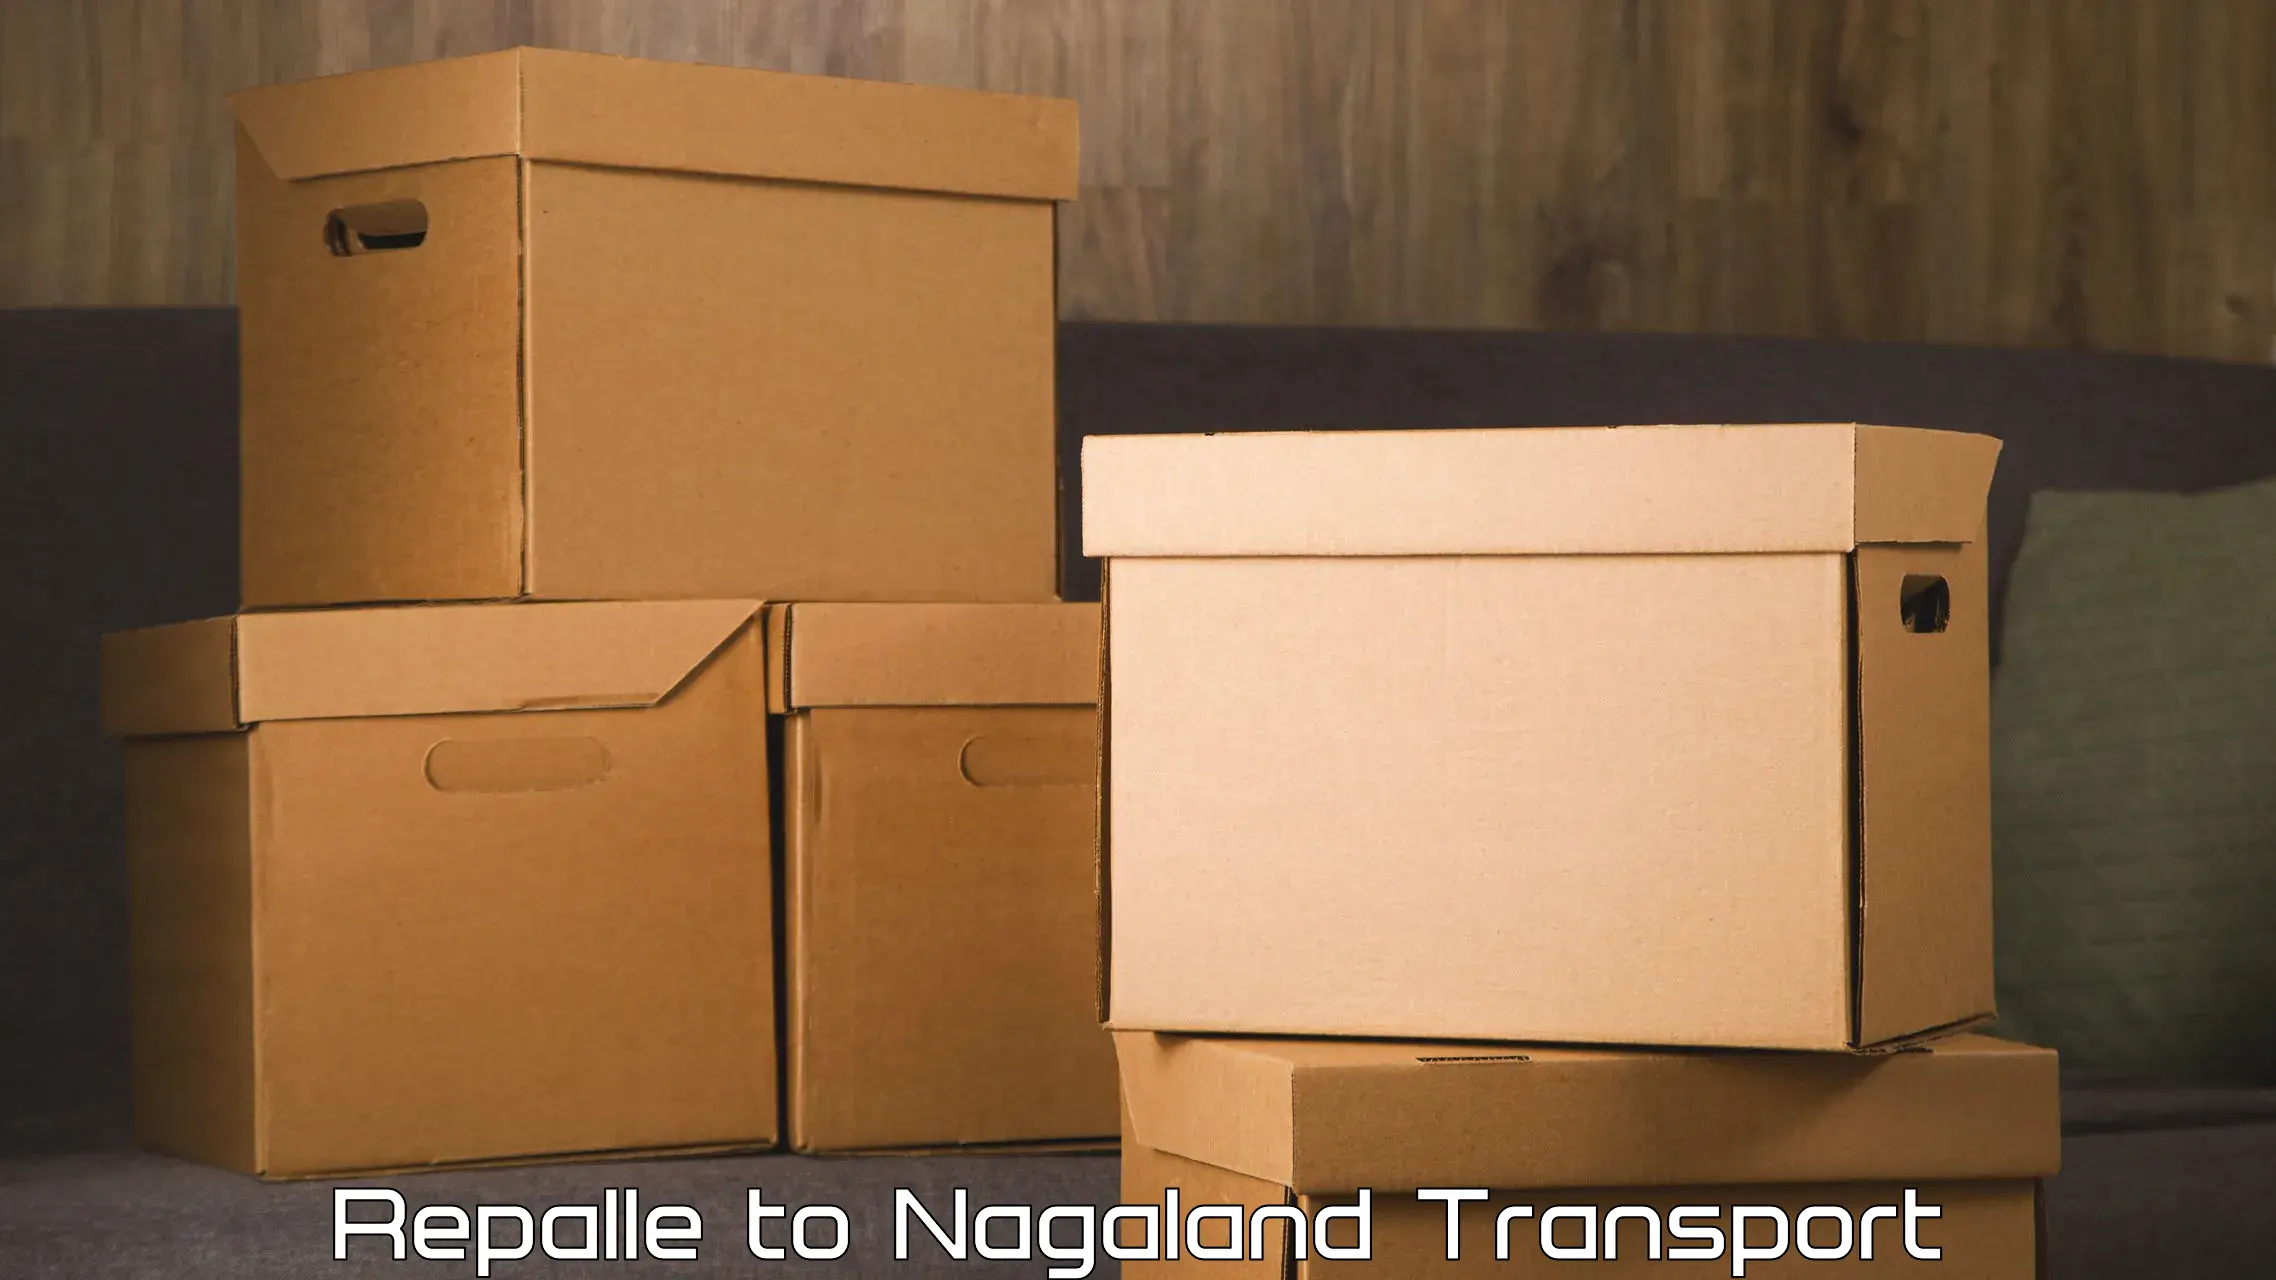 Two wheeler transport services Repalle to Nagaland